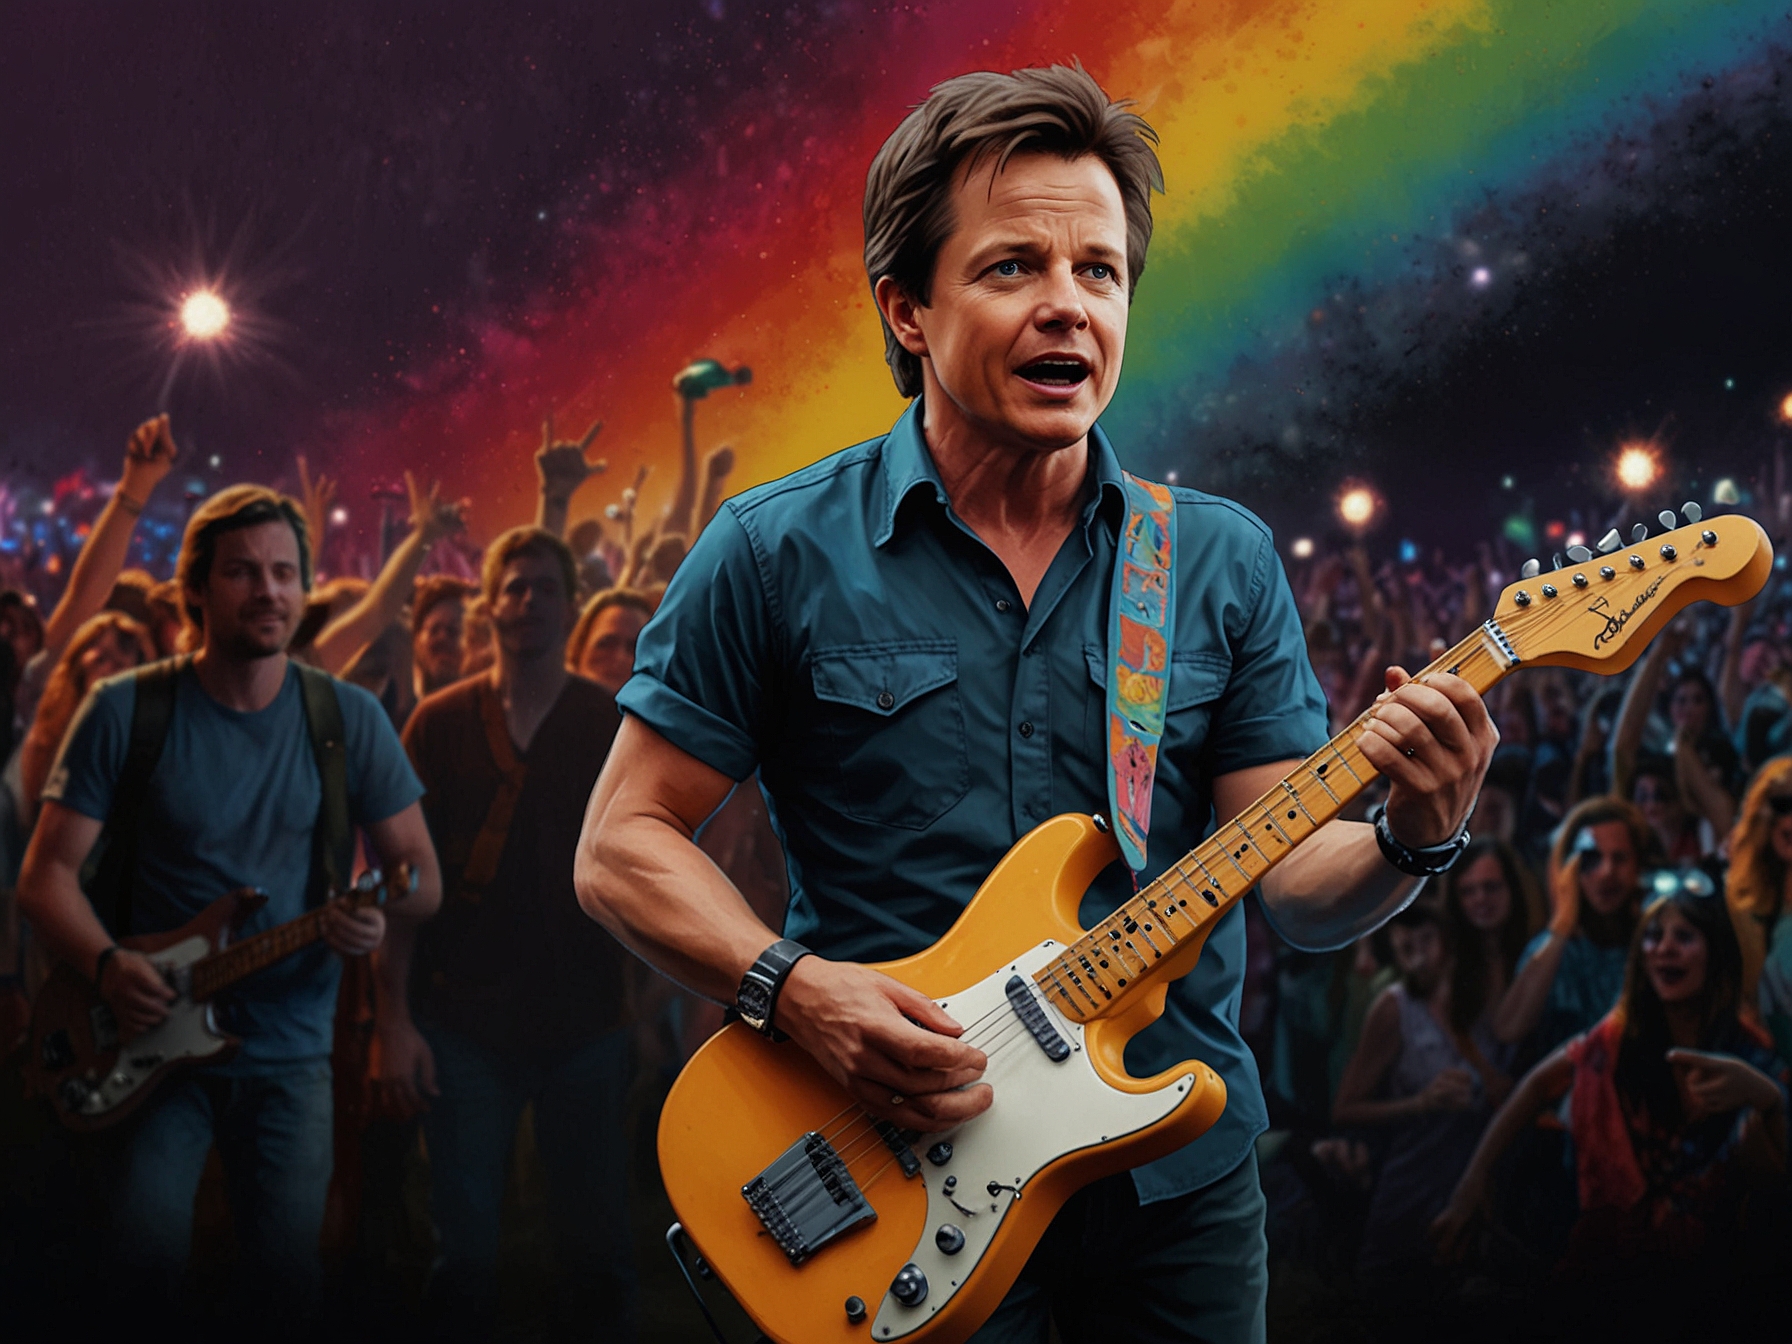 Michael J. Fox makes a surprise appearance at Glastonbury 2024, joining Coldplay on stage to perform 'Johnny B. Goode,' creating a nostalgic and electric moment for the crowd.